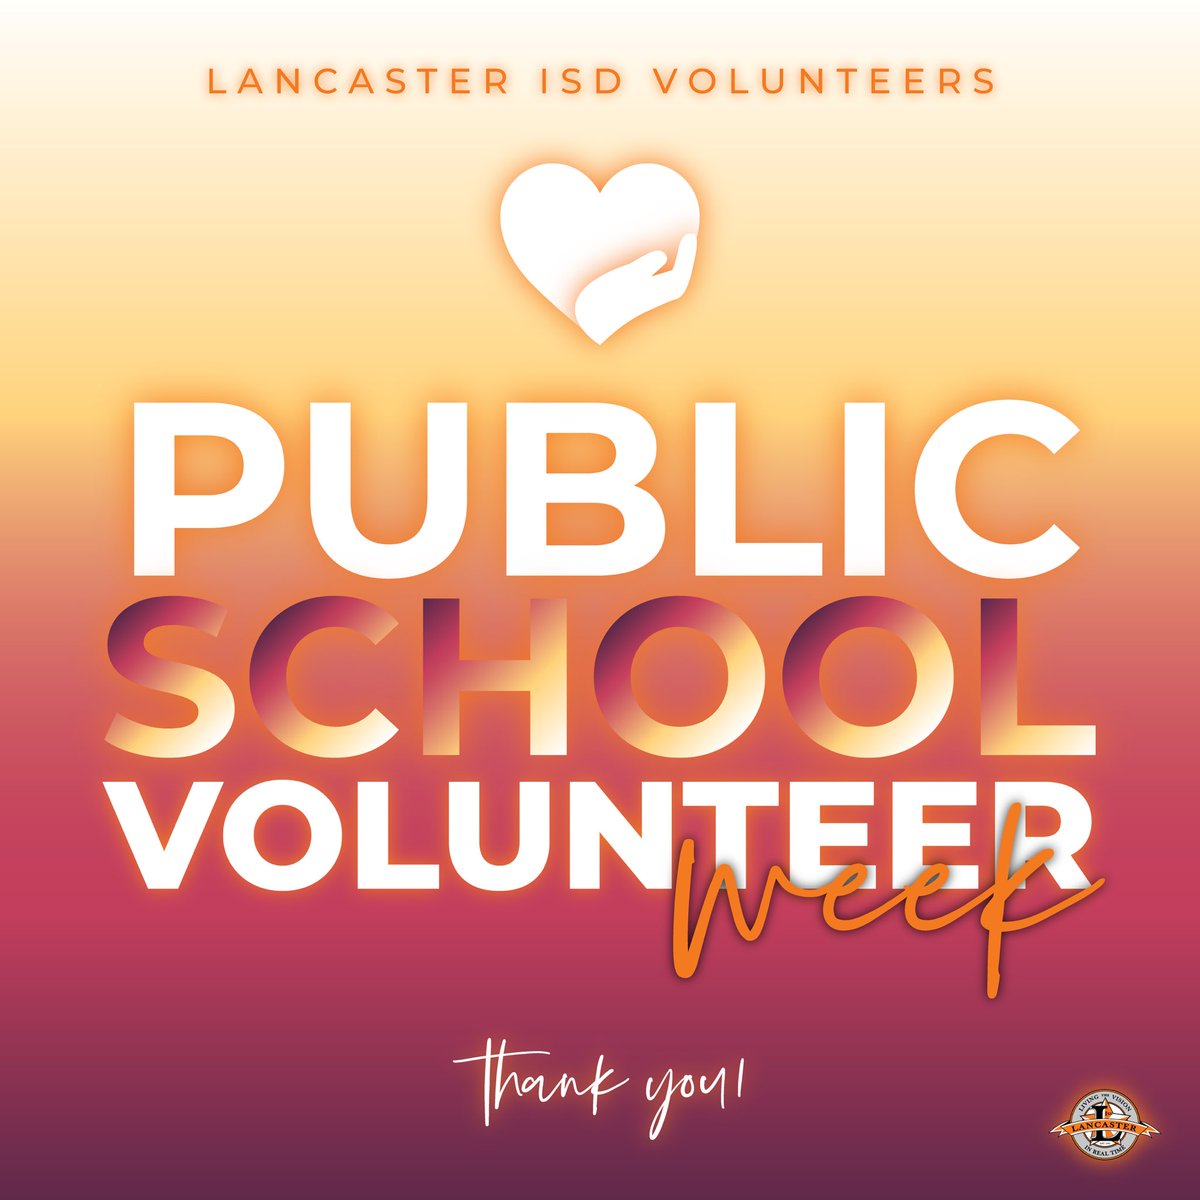 Big shoutout to all our amazing volunteers in Lancaster ISD! Thanks for your awesome support and dedication. You make our schools better every day! 🙌 #PublicSchoolVolunteerWeek